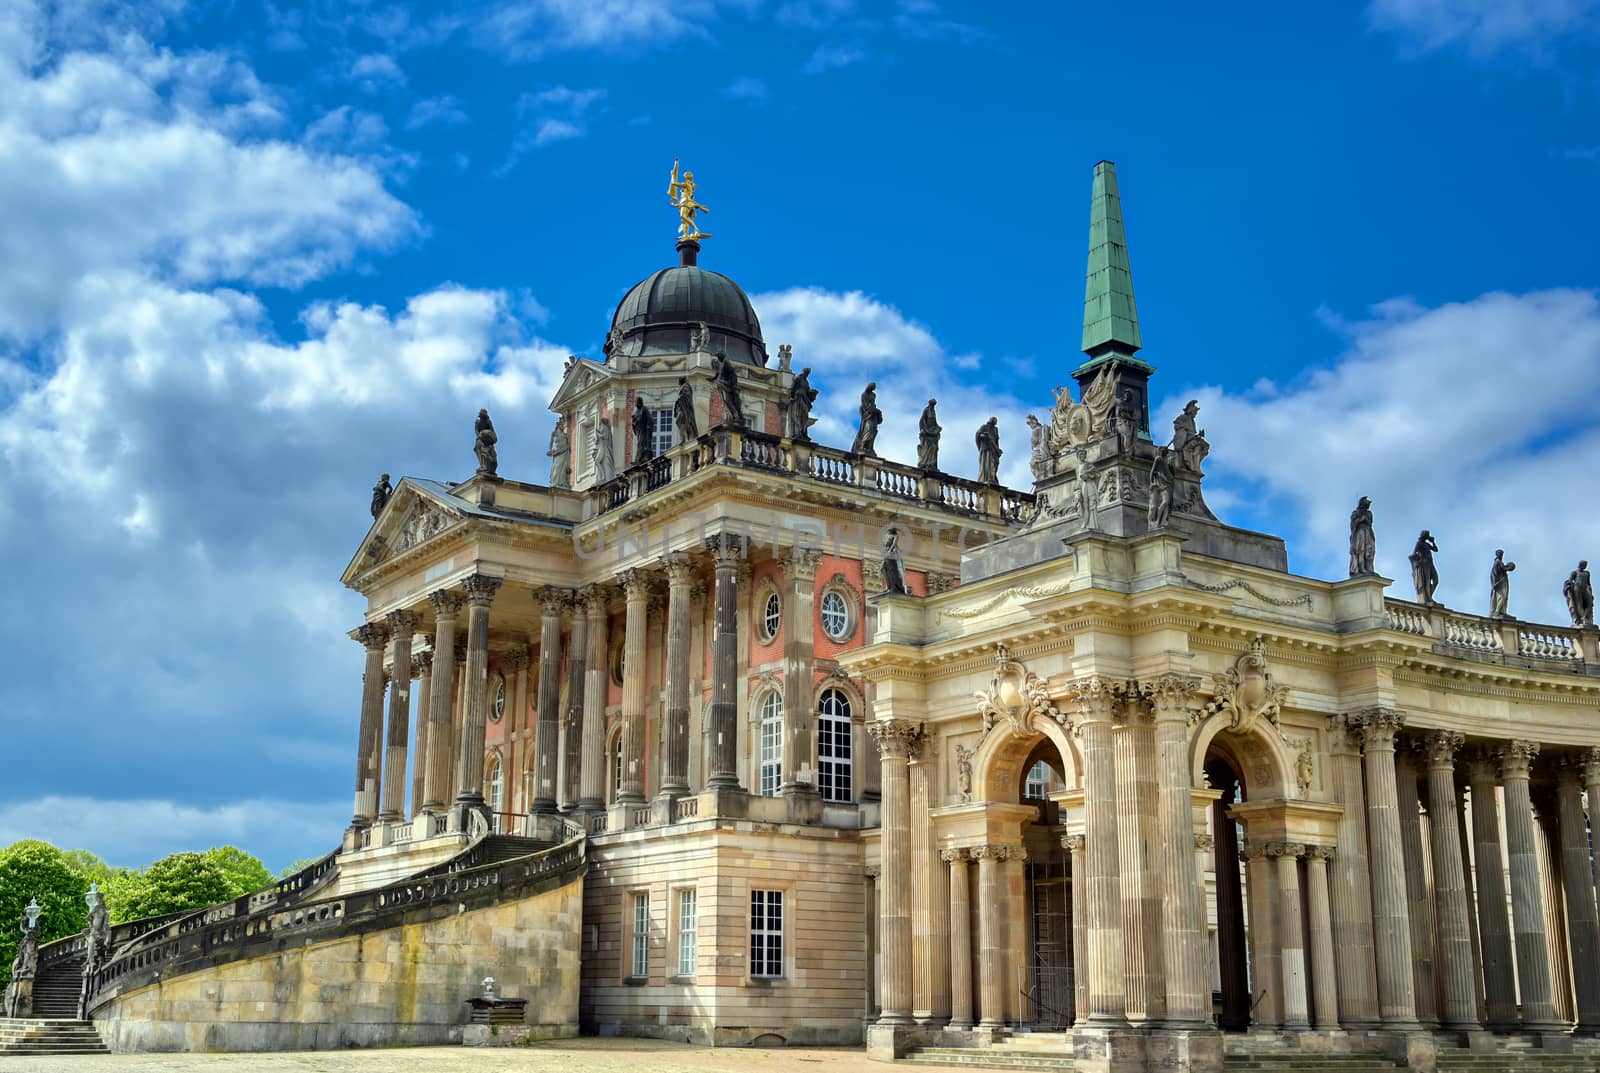 The New Palace in Sanssouci Park located in Potsdam, Germany.